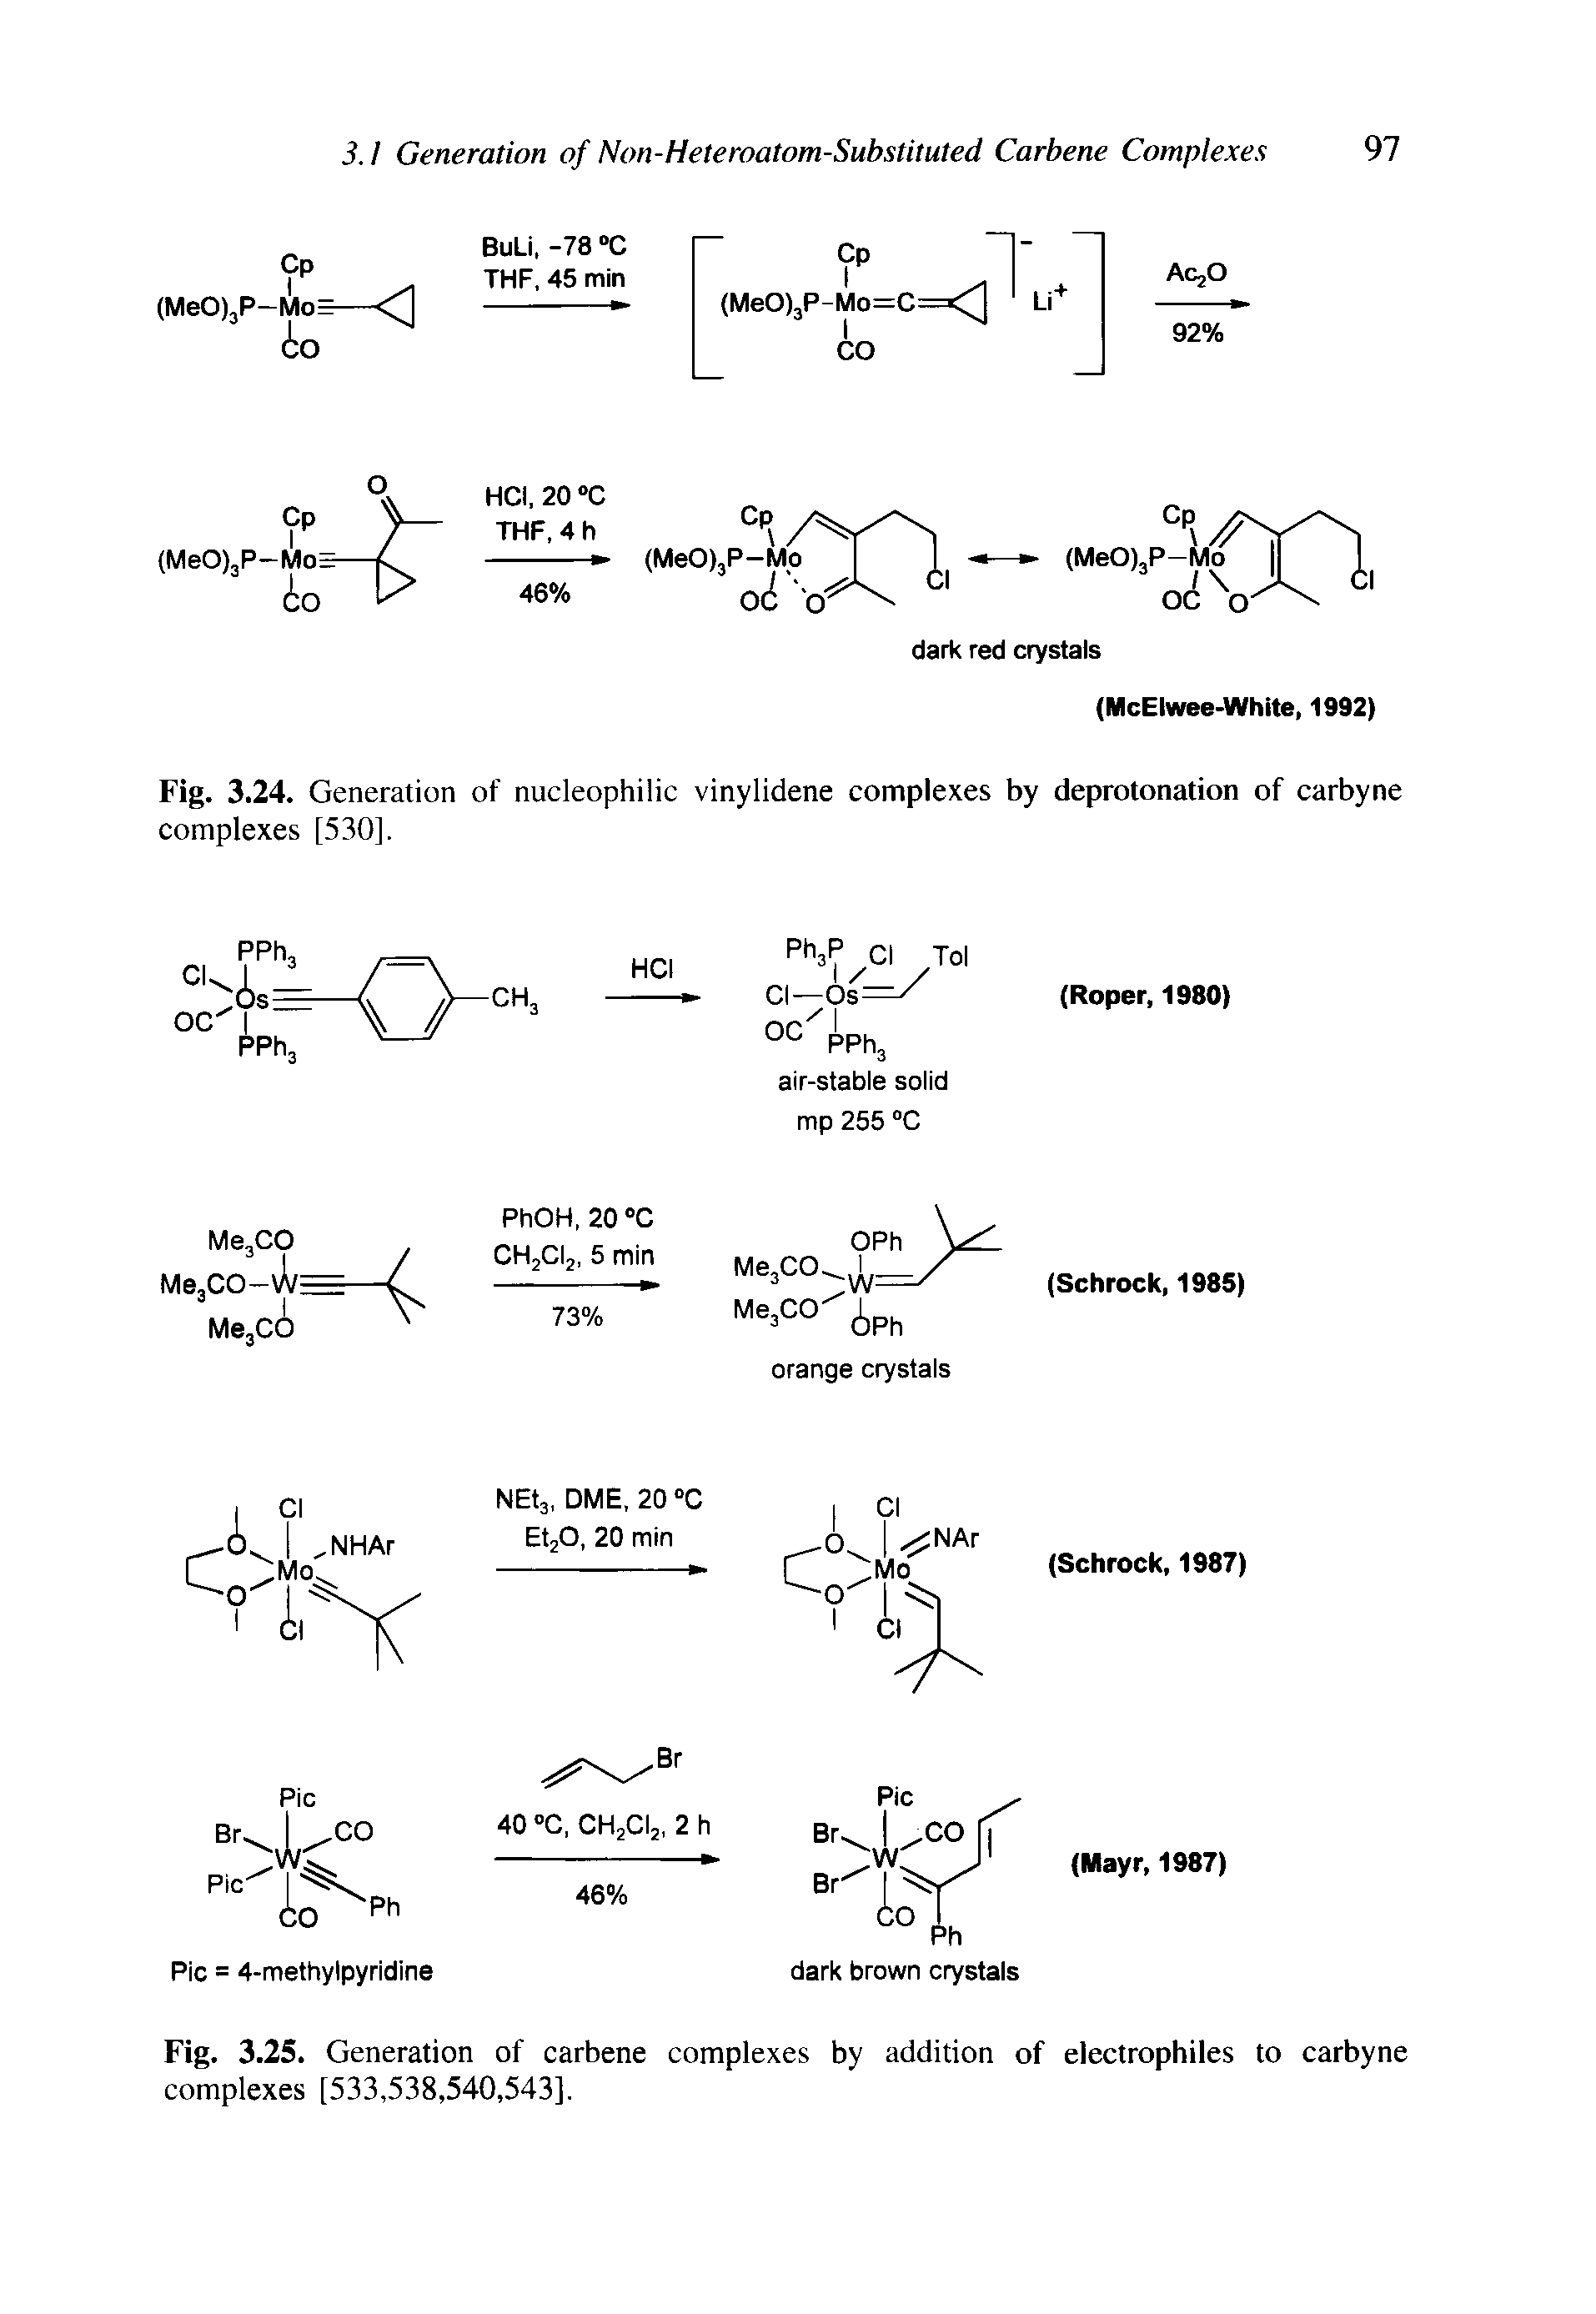 Fig. 3.25. Generation of carbene complexes by addition of electrophiles to carbyne complexes [533,538,540,543],...